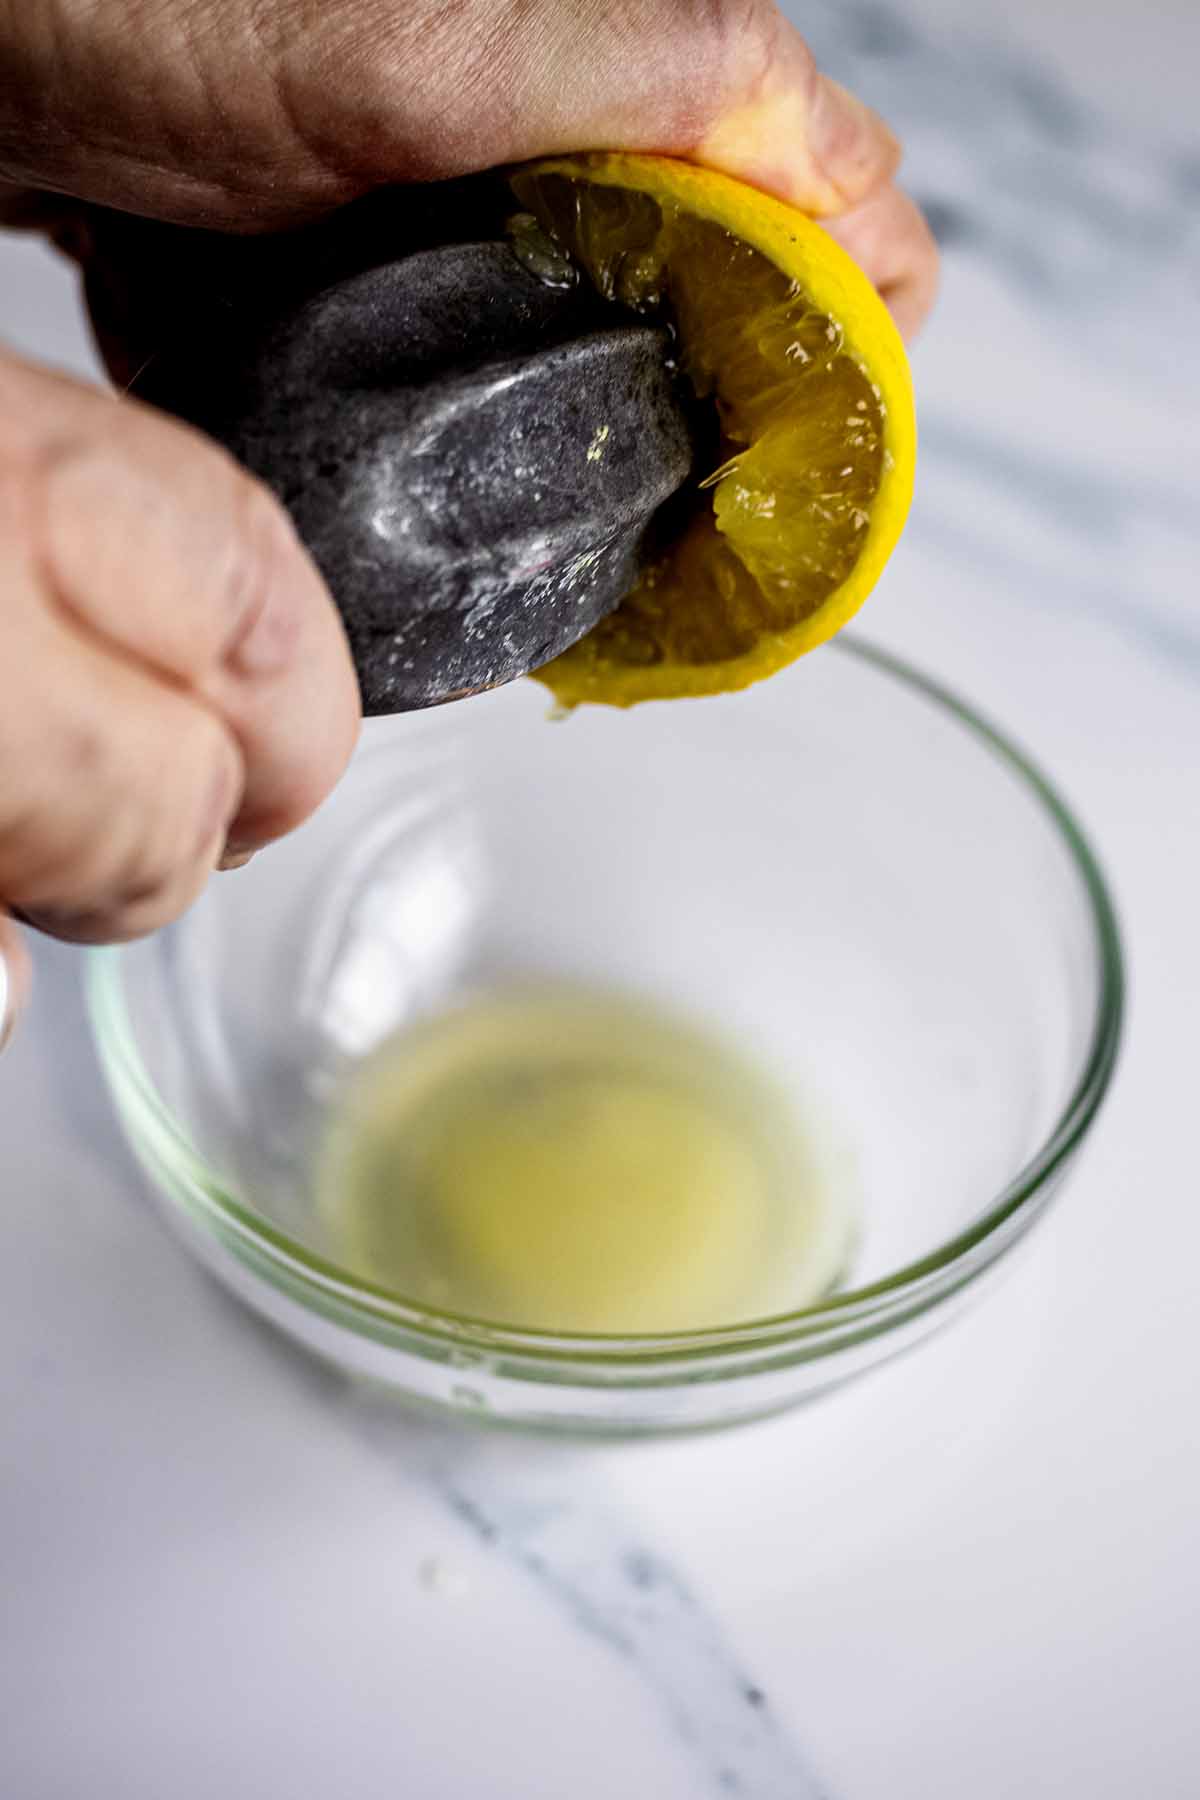 Squeezing lemon juice into a small glass bowl